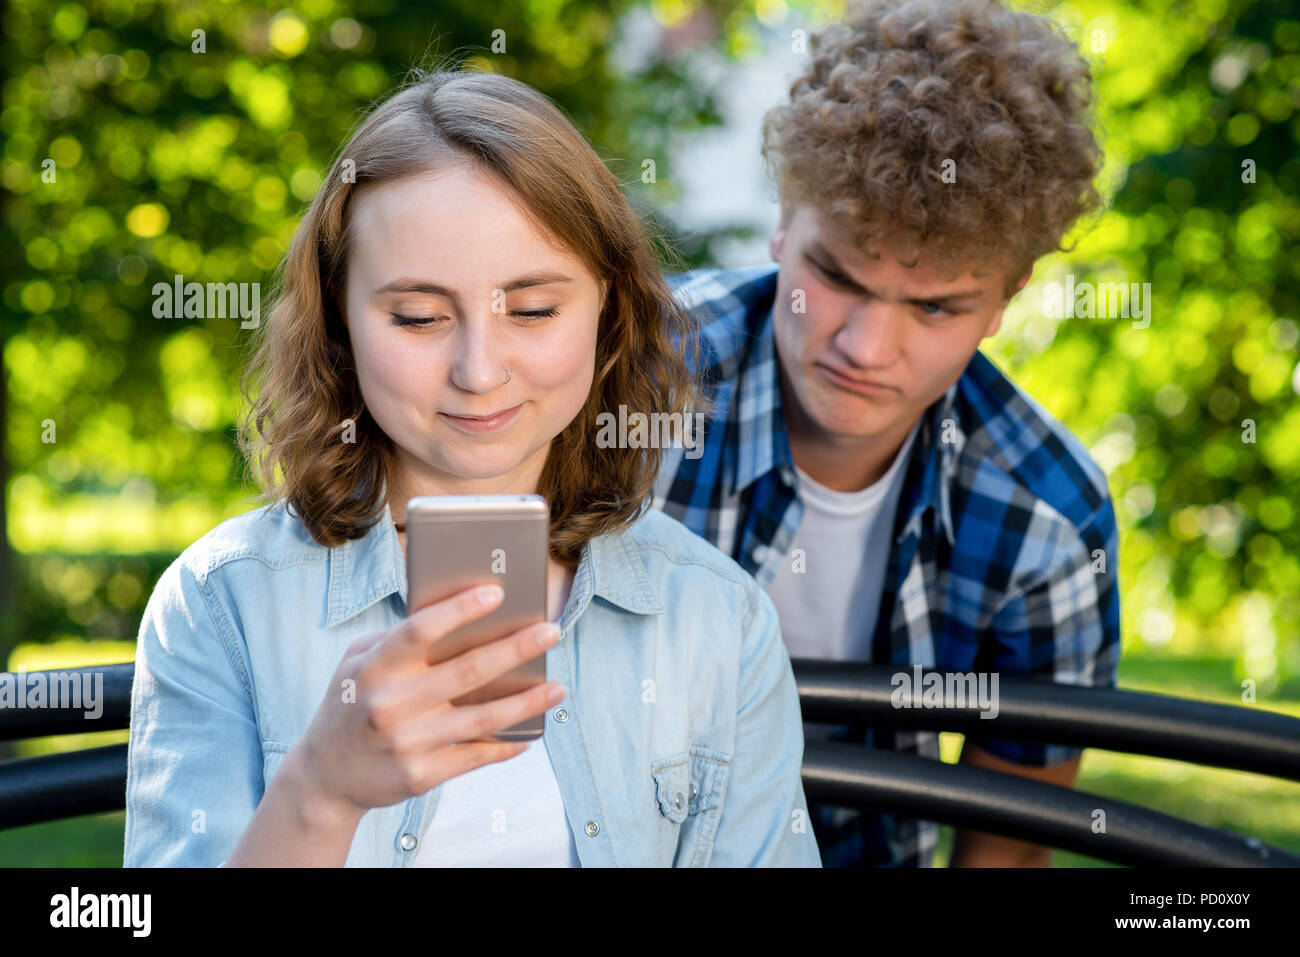 Beautiful brunette girl in summer in a park on nature. In hands of holding a smartphone communicates in social networks. A young man spies on her sms. The concept of distrust problem in relationship. Stock Photo